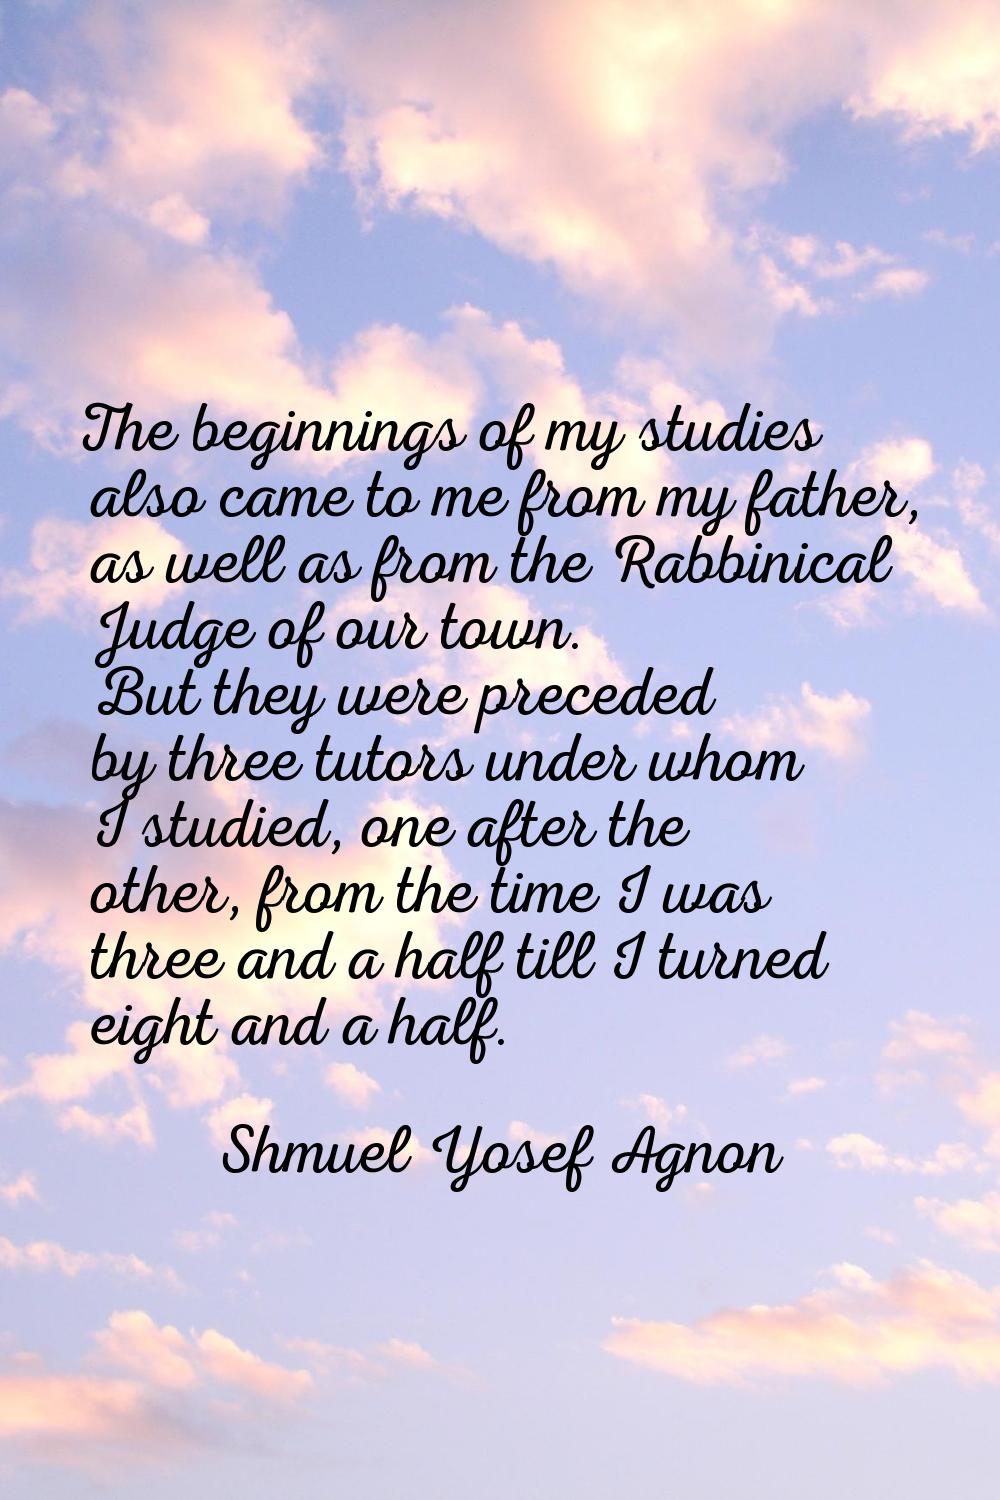 The beginnings of my studies also came to me from my father, as well as from the Rabbinical Judge o